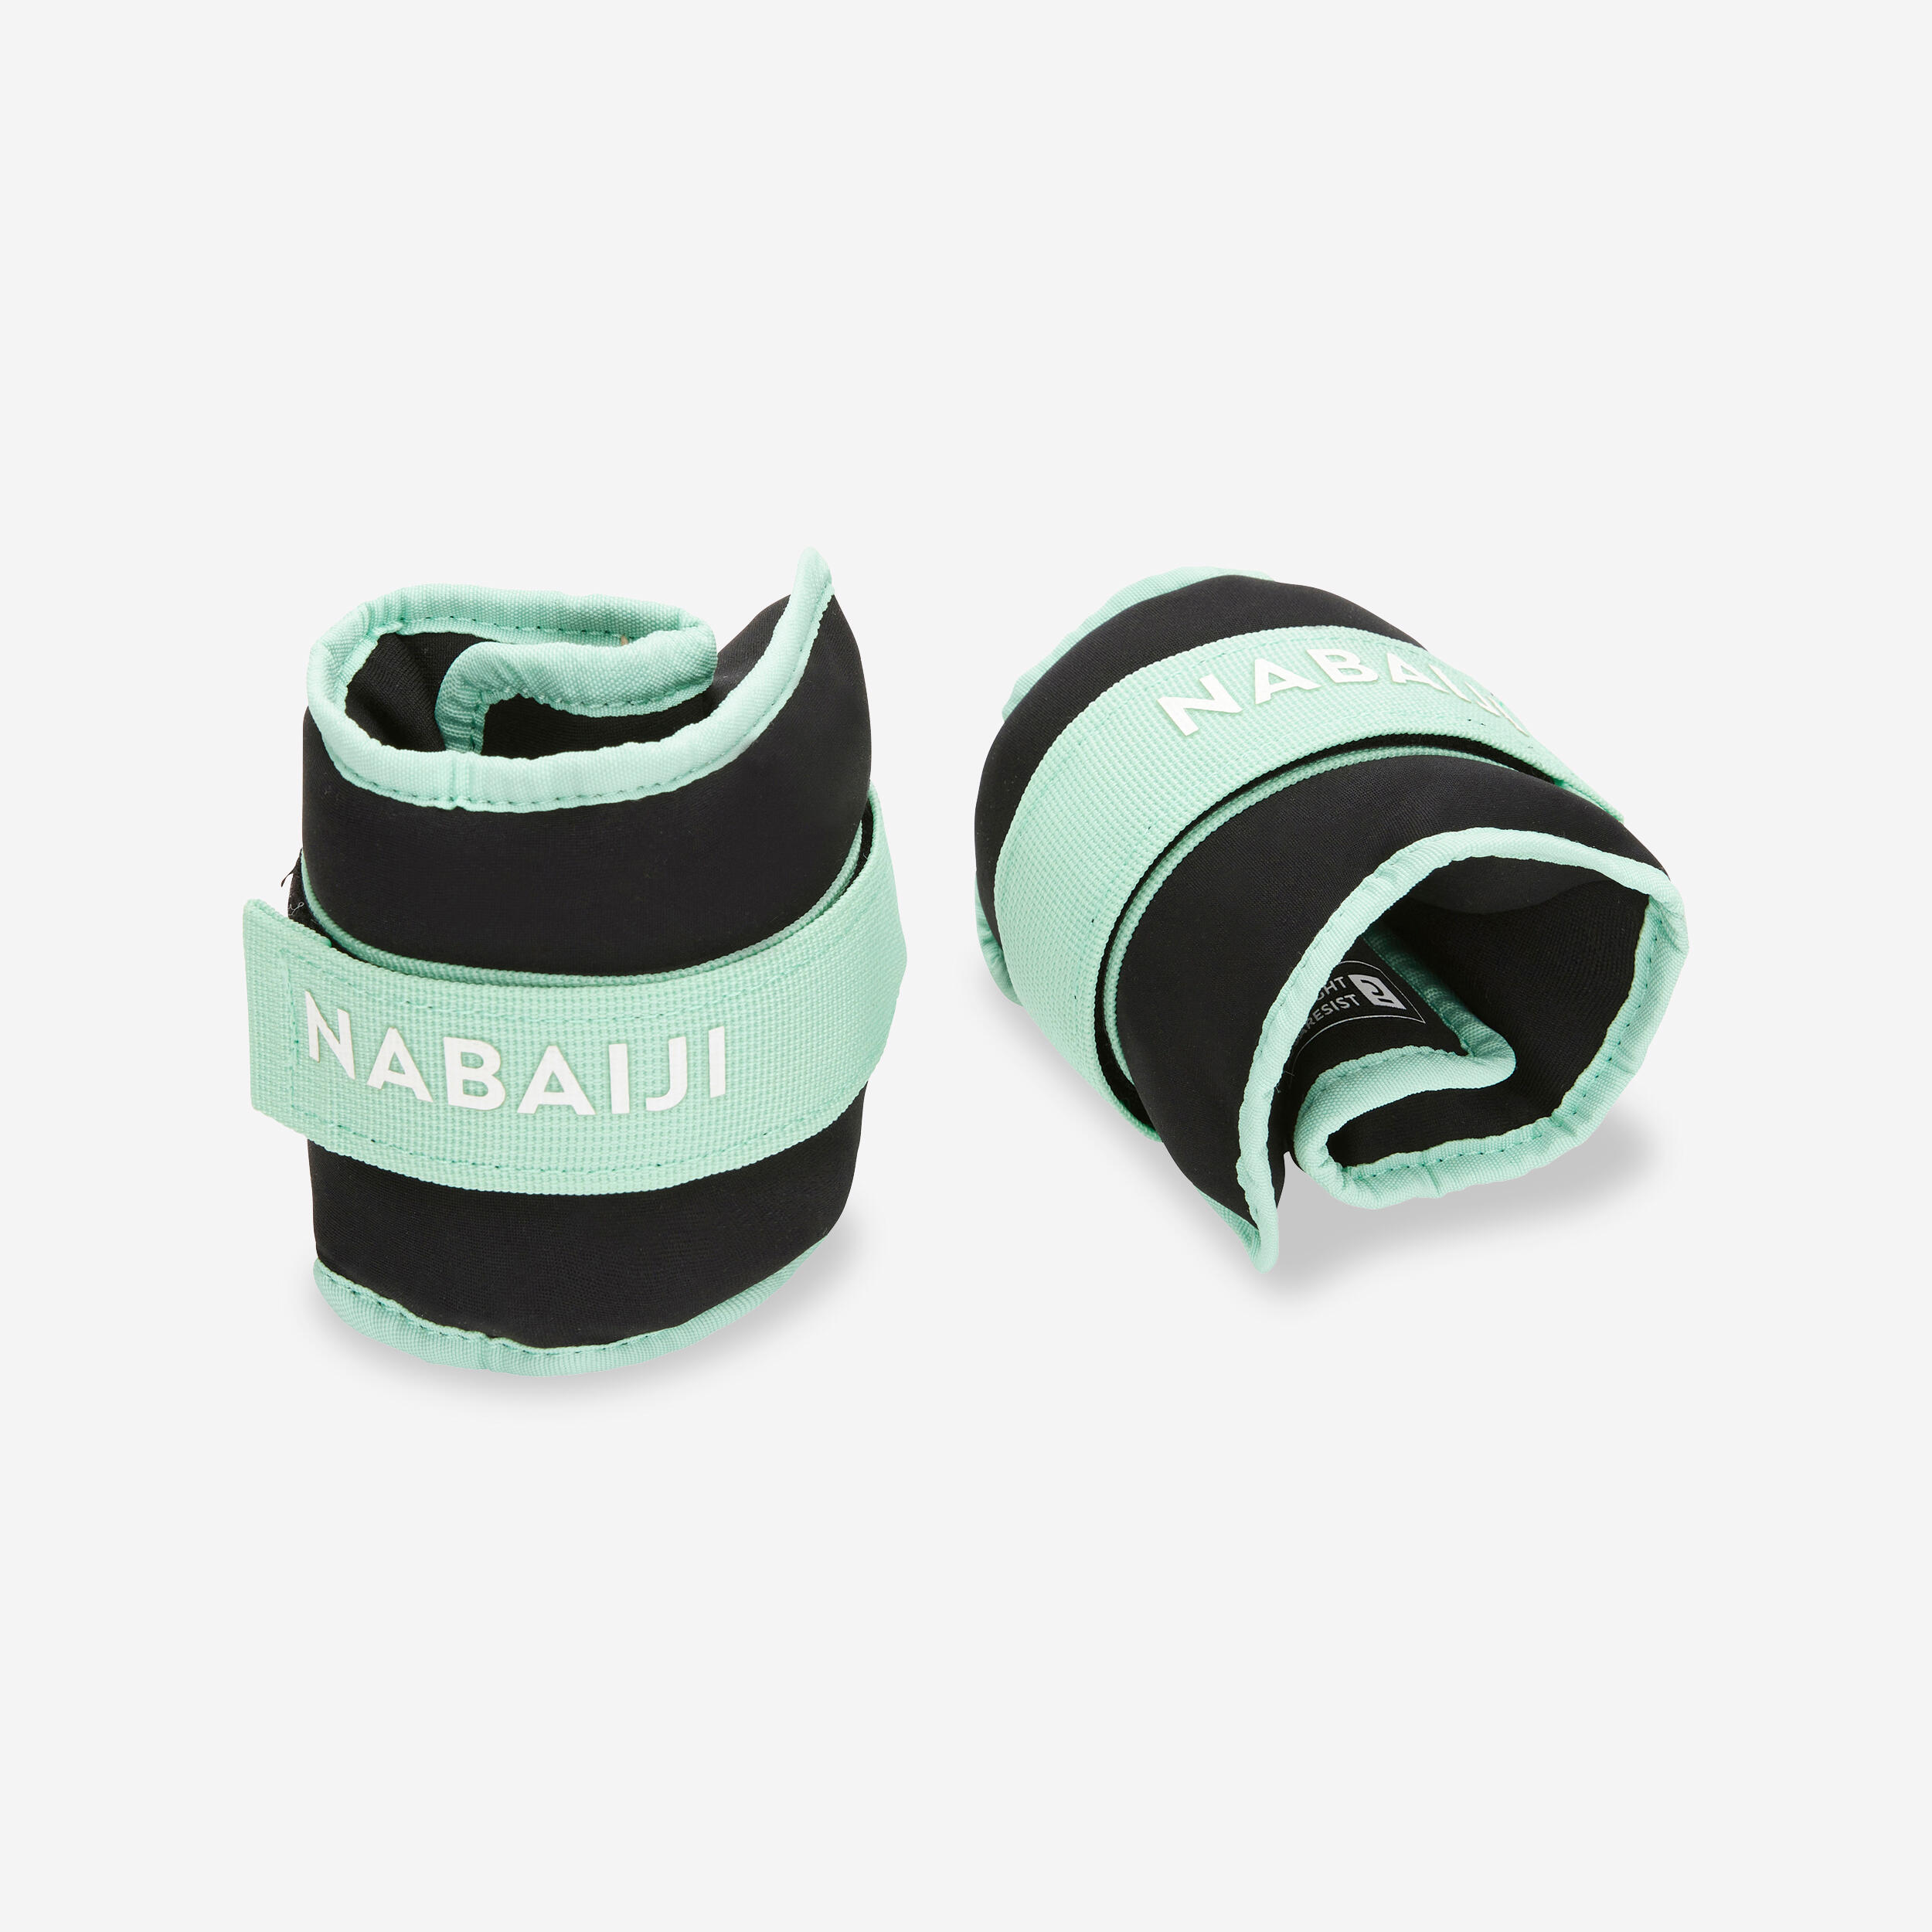 NABAIJI Aquafit weighted bands with strap - light green. 2*0.5KG